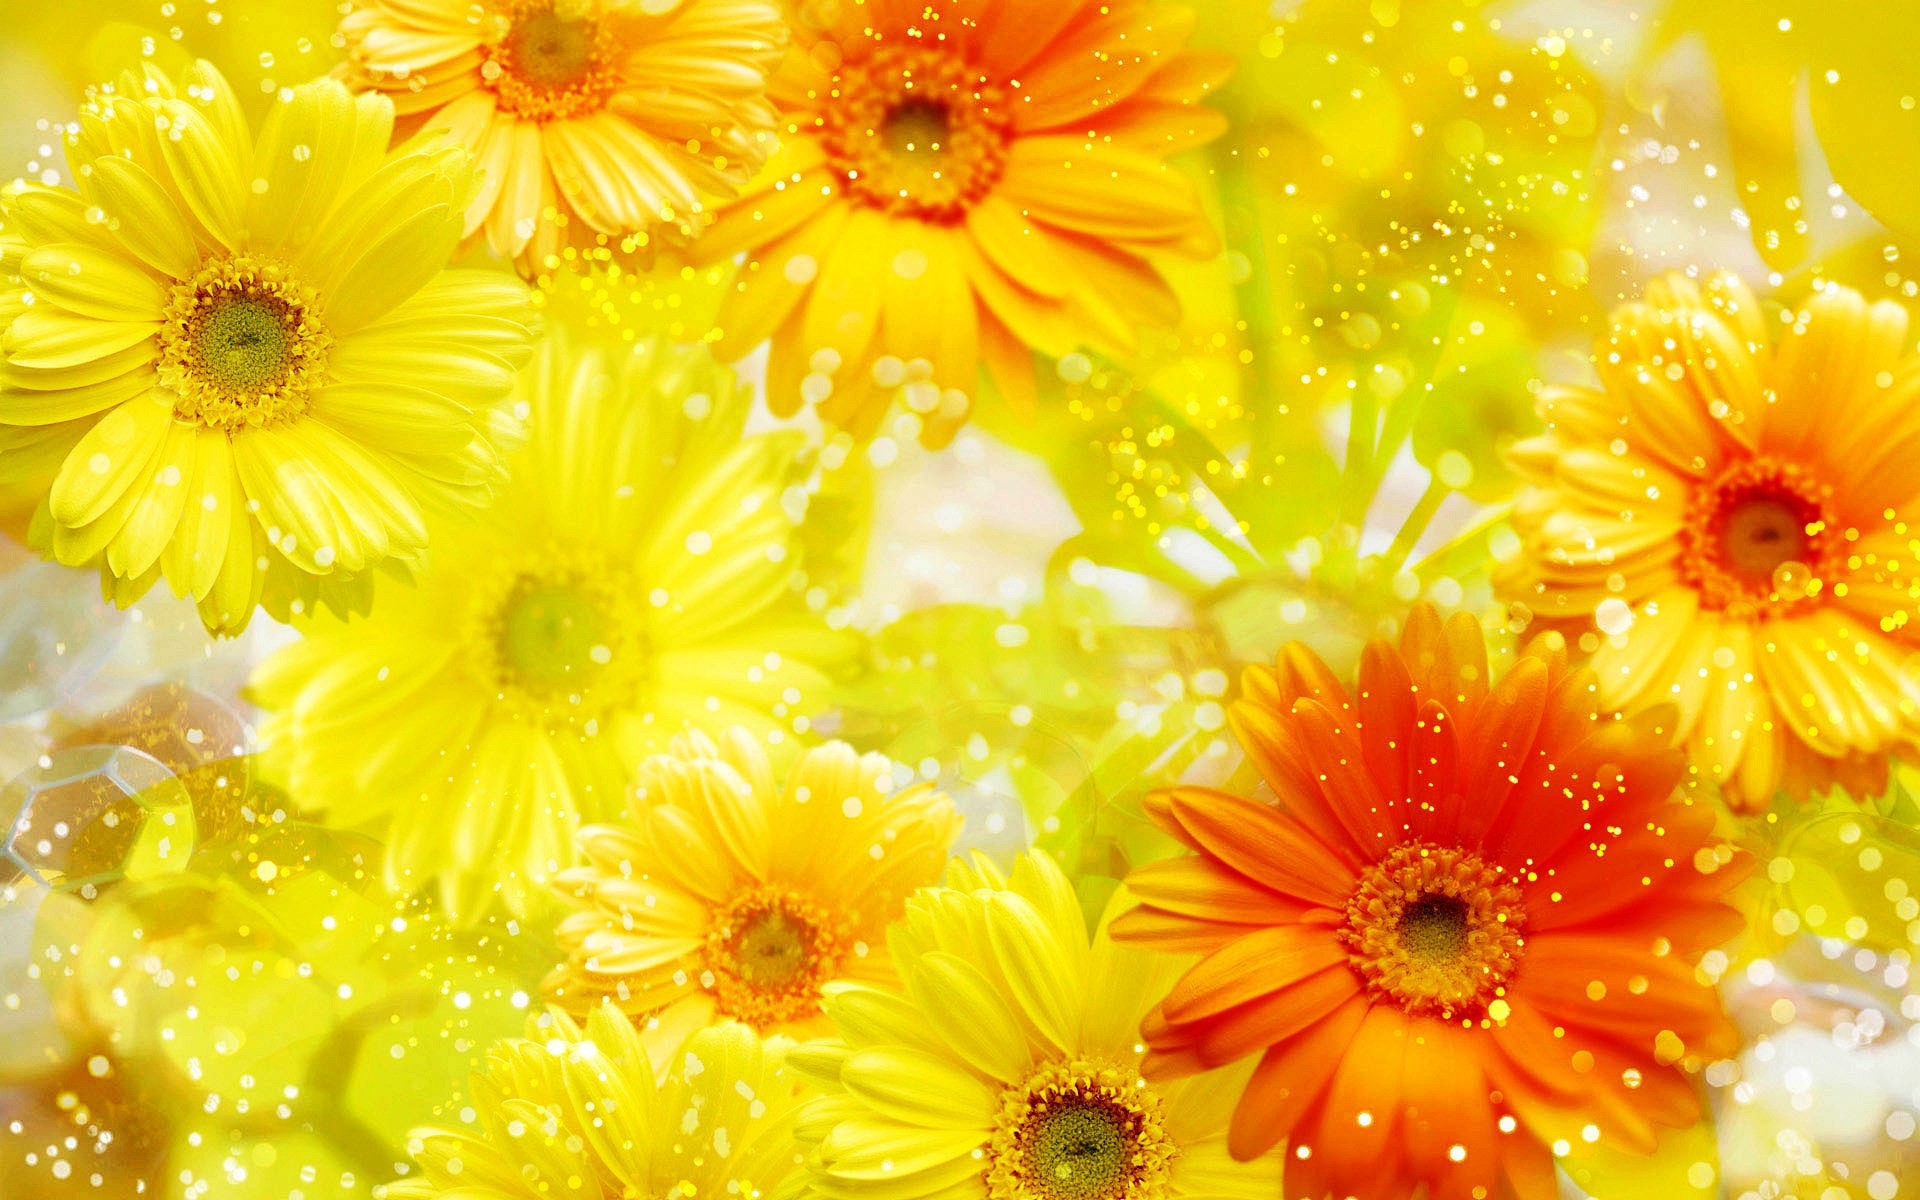 Download the following Yellow Flowers Wallpaper 2437 by clicking the button positioned underneath the "Download Wallpaper" section.